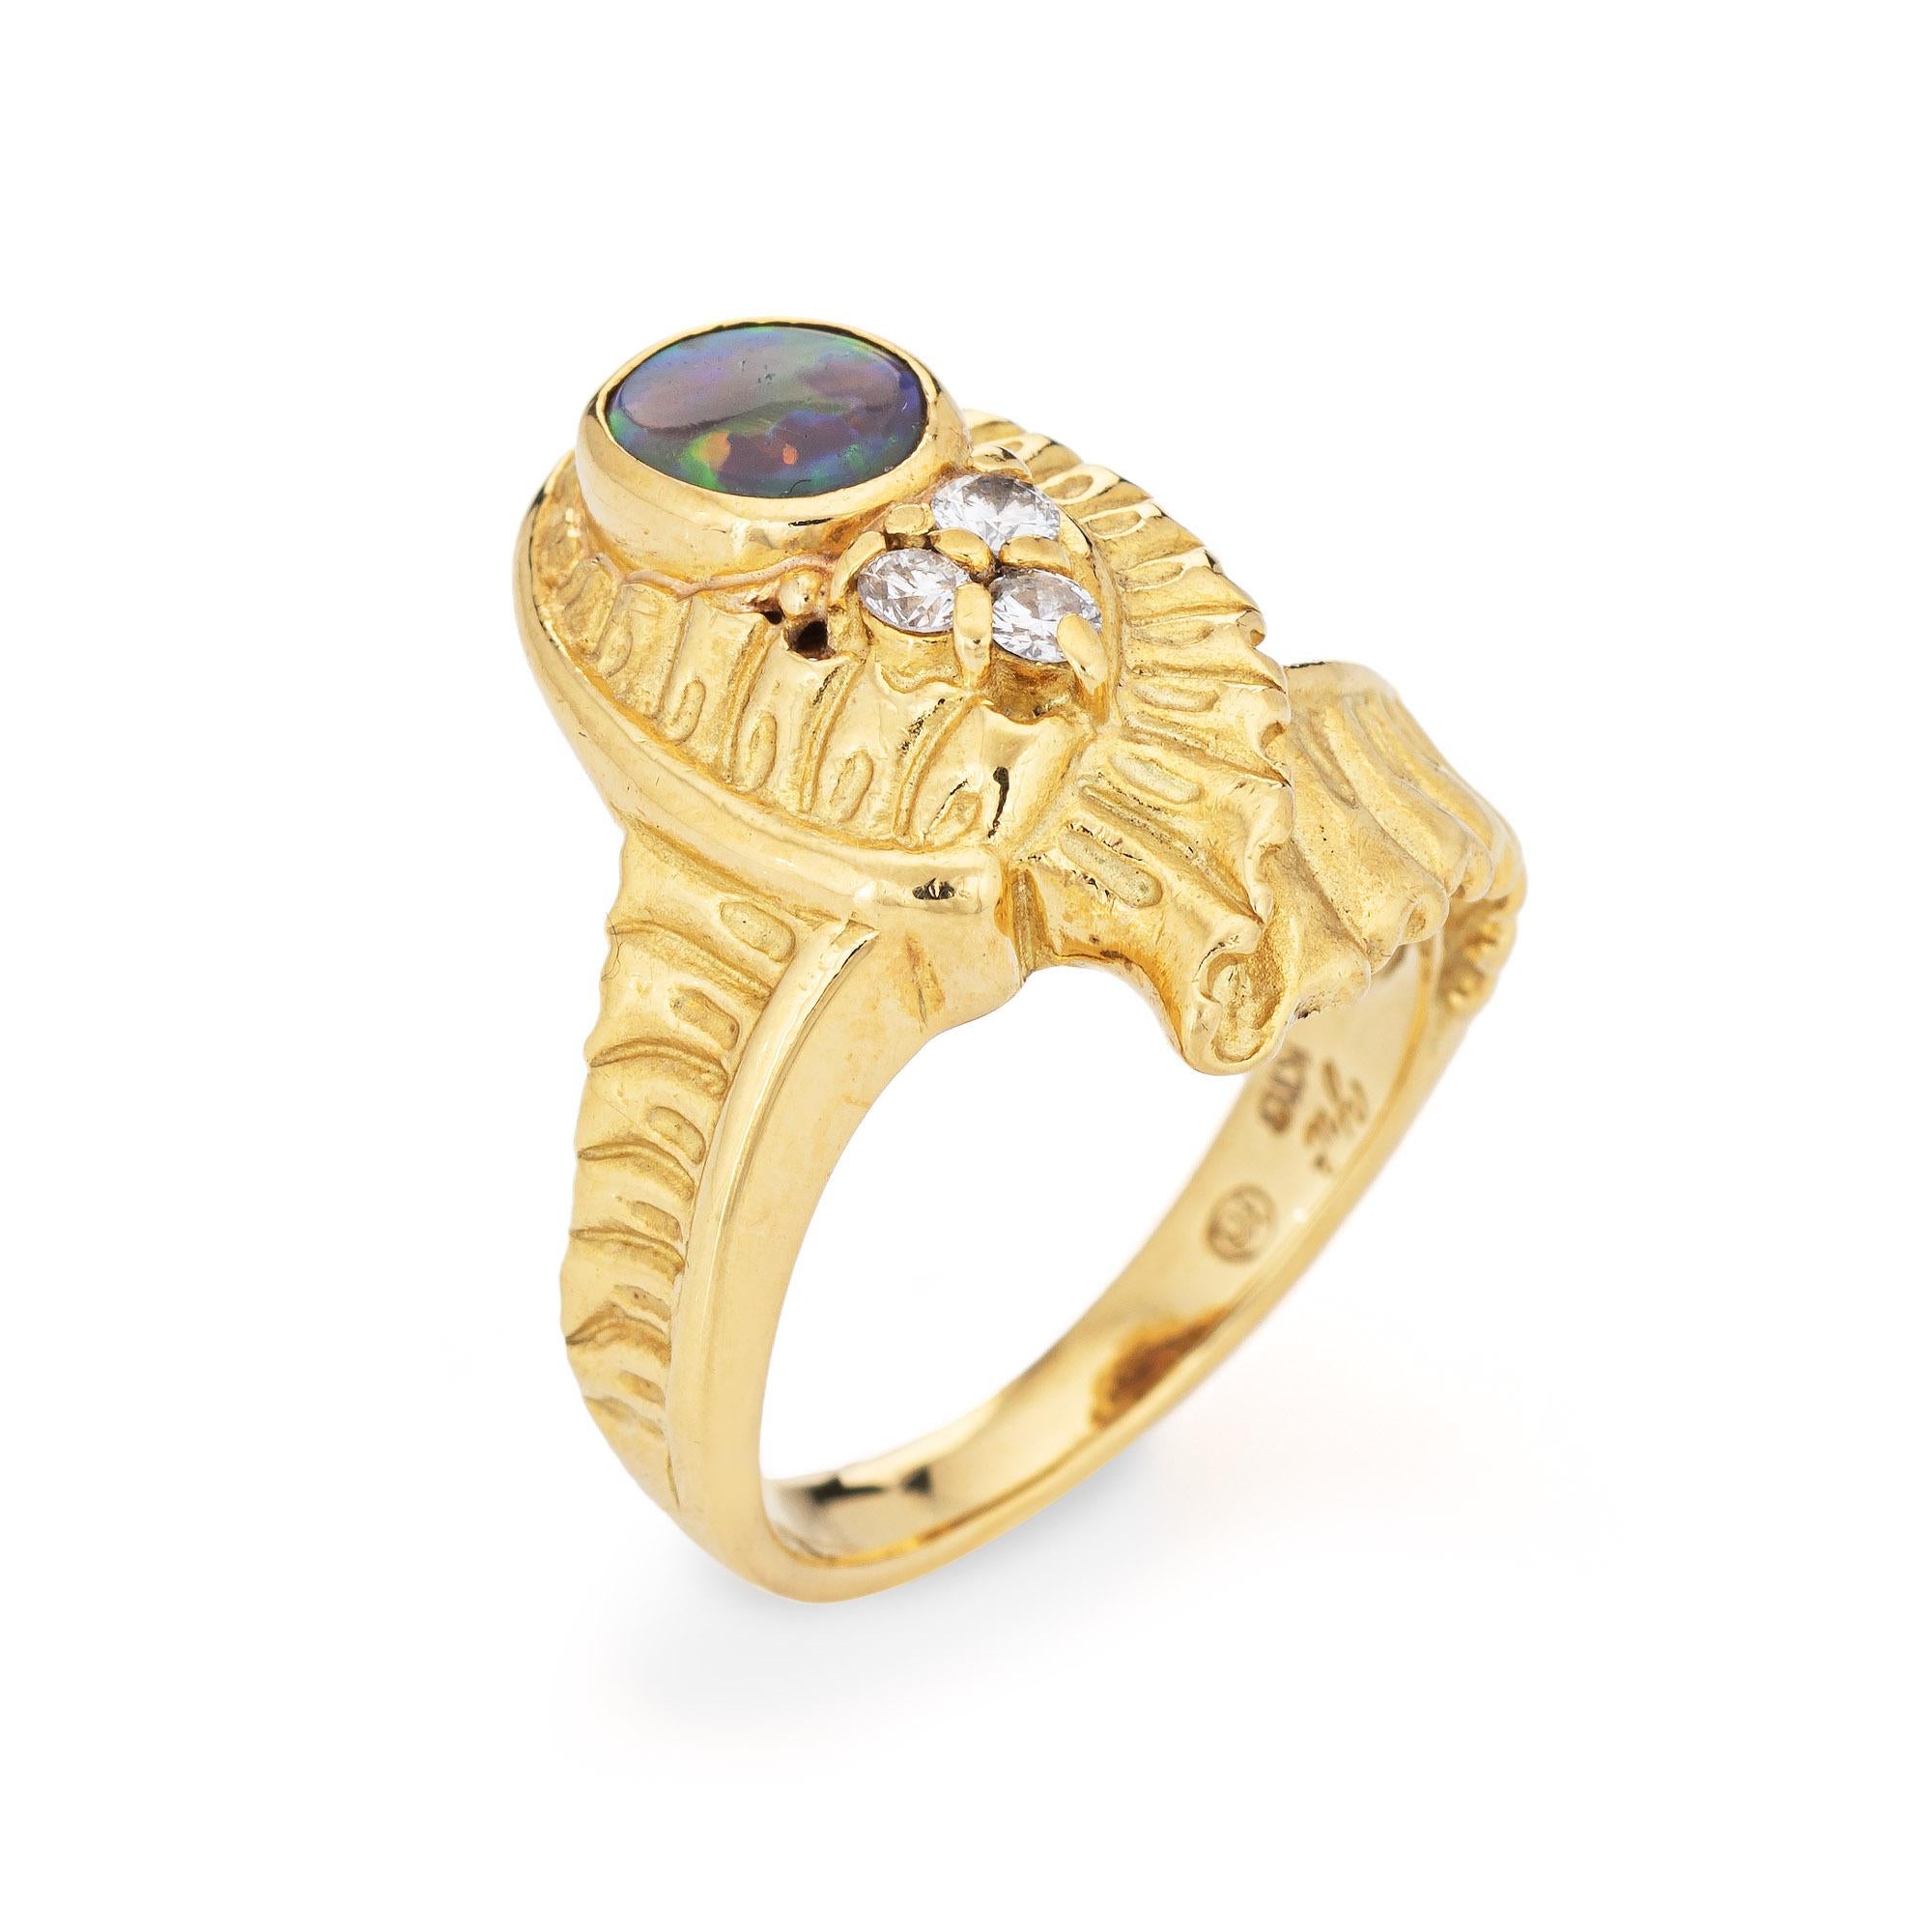 Finely detailed vintage black opal & diamond ring, crafted in 18 karat yellow gold (circa 1980s to 1990s). 

Centrally mounted black opal is estimated at 0.83 carats, accented with an estimated 0.10 carats of diamonds (estimated at I color and SI2